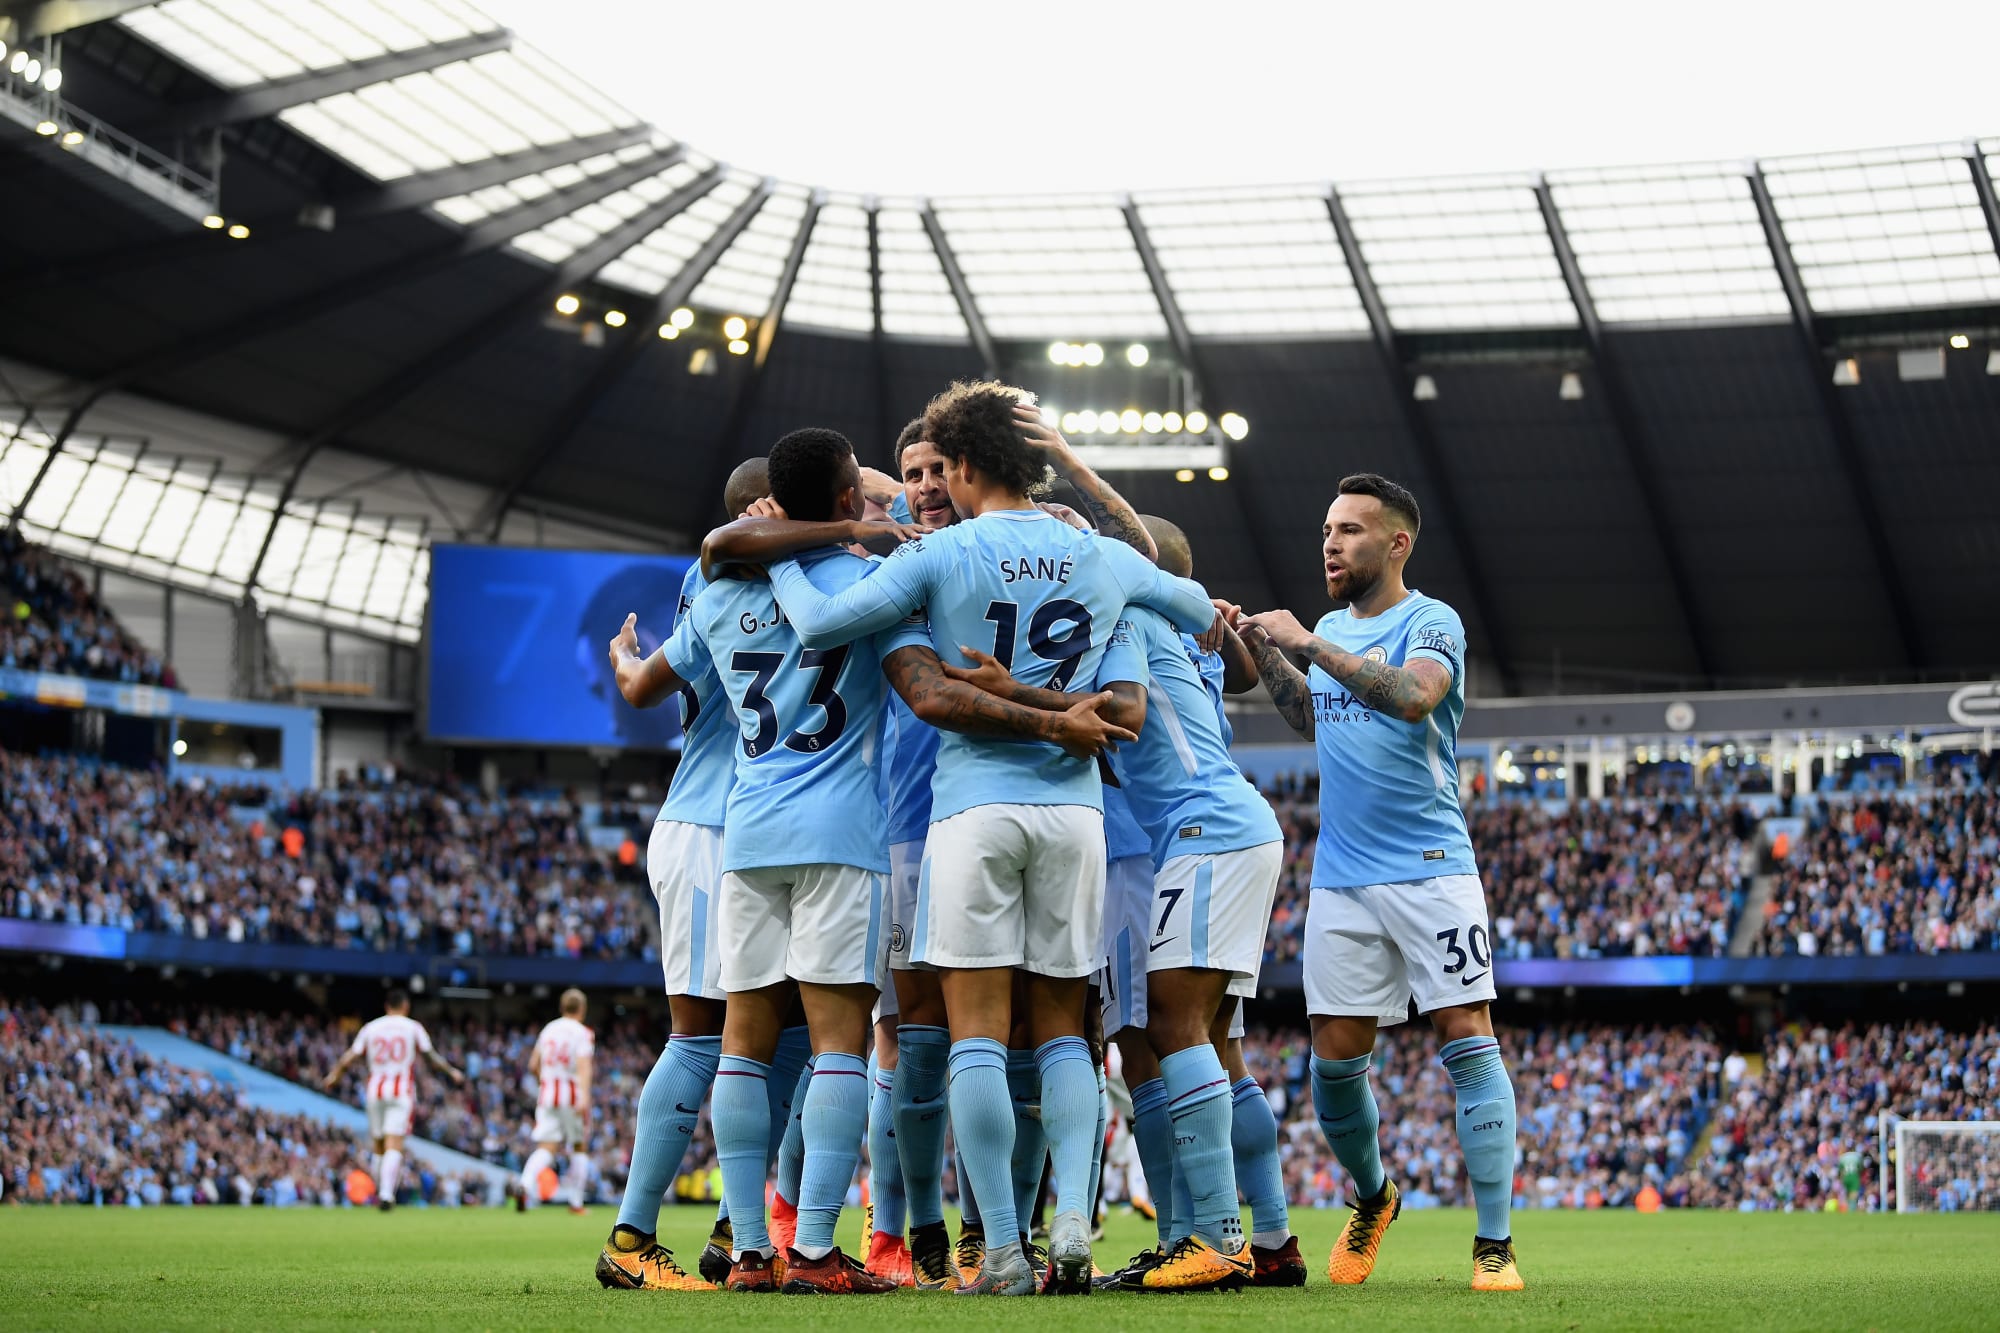 Match Preview The leaders Man City face Stubborn Burnley in the EPL